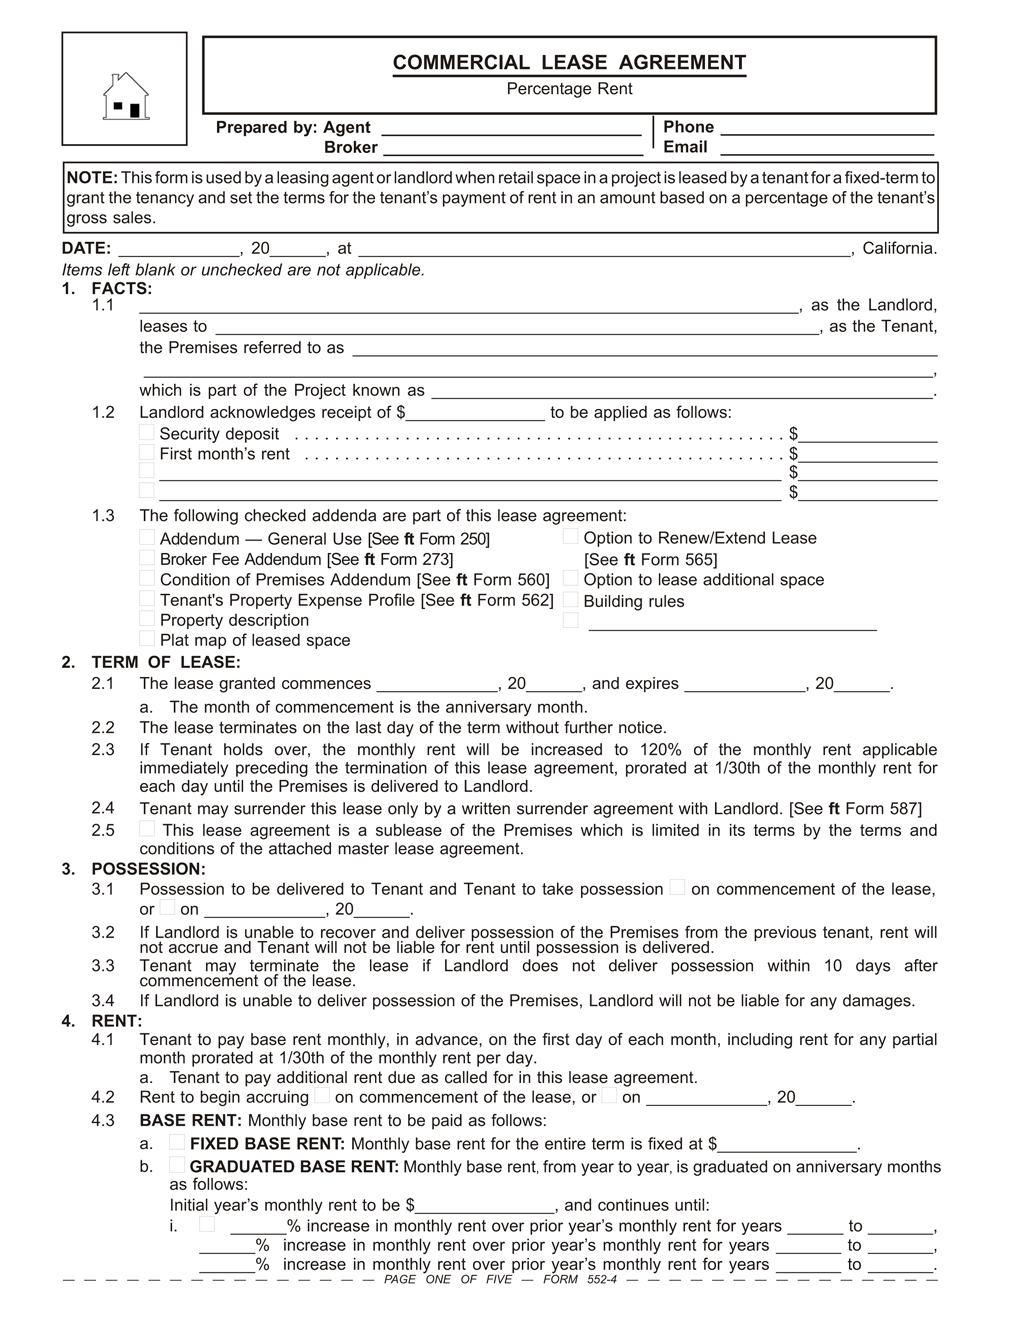 Office Tenancy Agreement Template Commercial Lease Agreement Percentage Rent Rpi Form 552 4